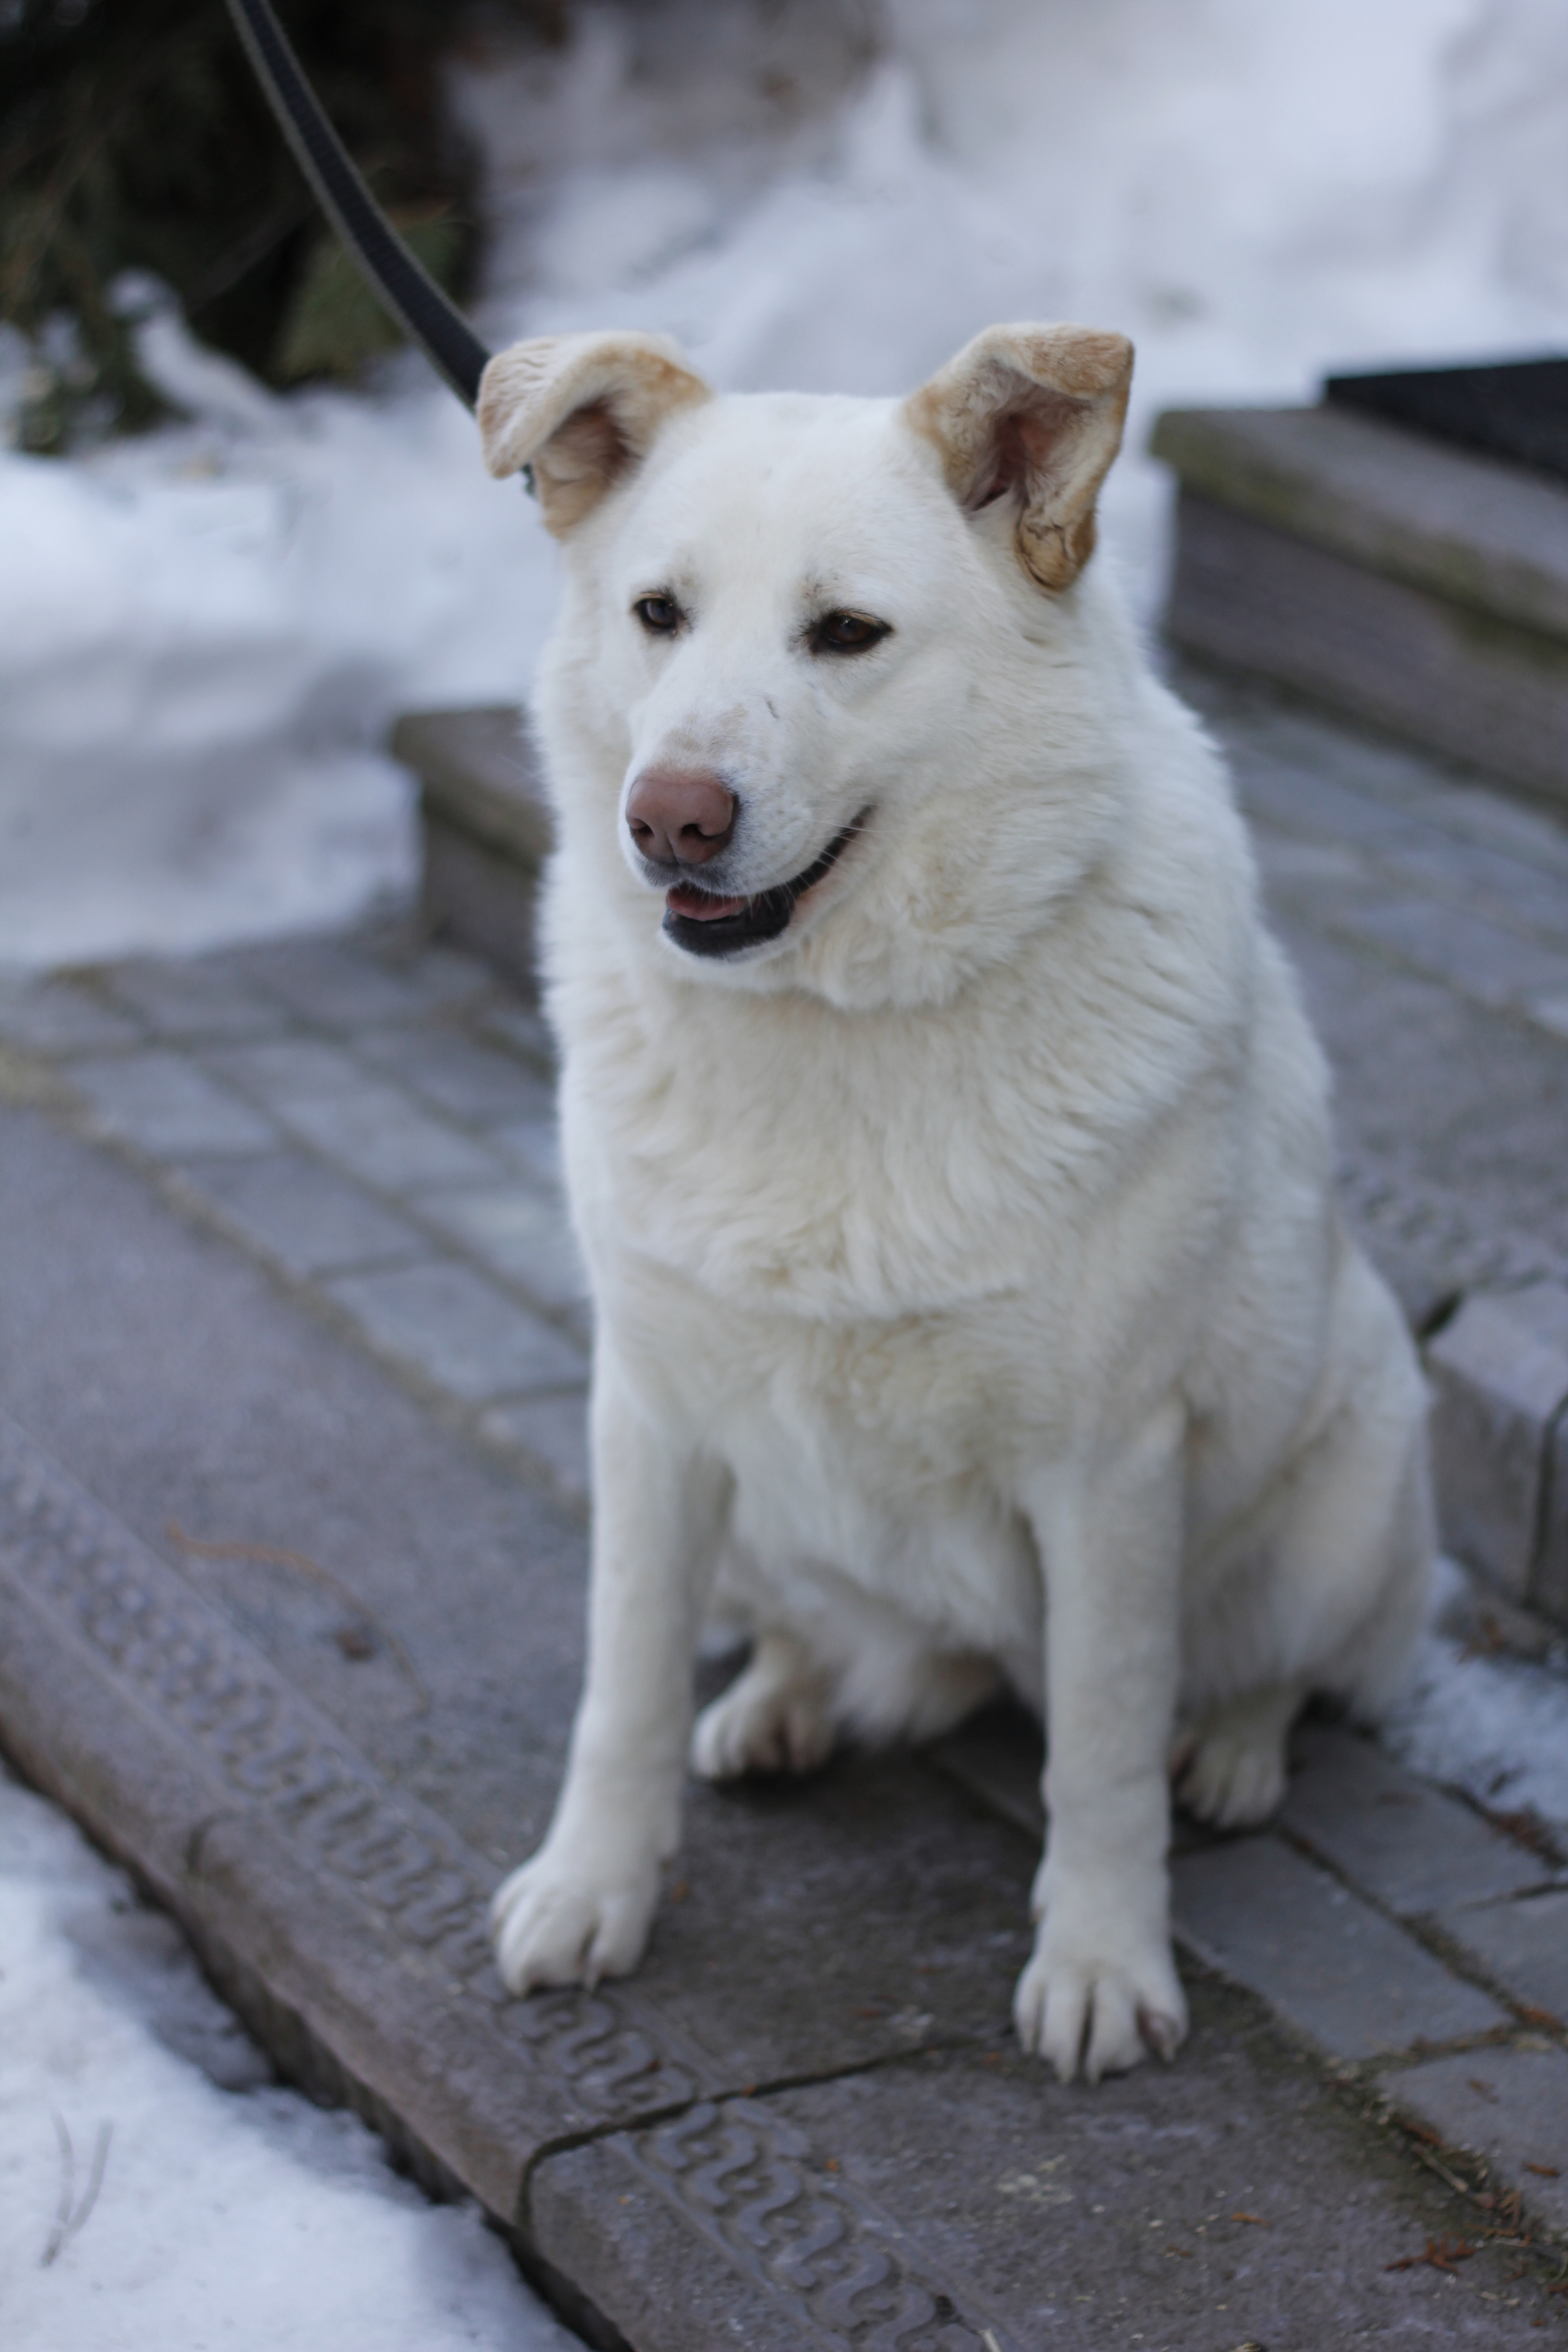 Gretta is looking for a house Moscow, Podolsk and Moscow region - My, Homeless animals, Dog, In good hands, Volunteering, Animal shelter, Shelter, Help, Longpost